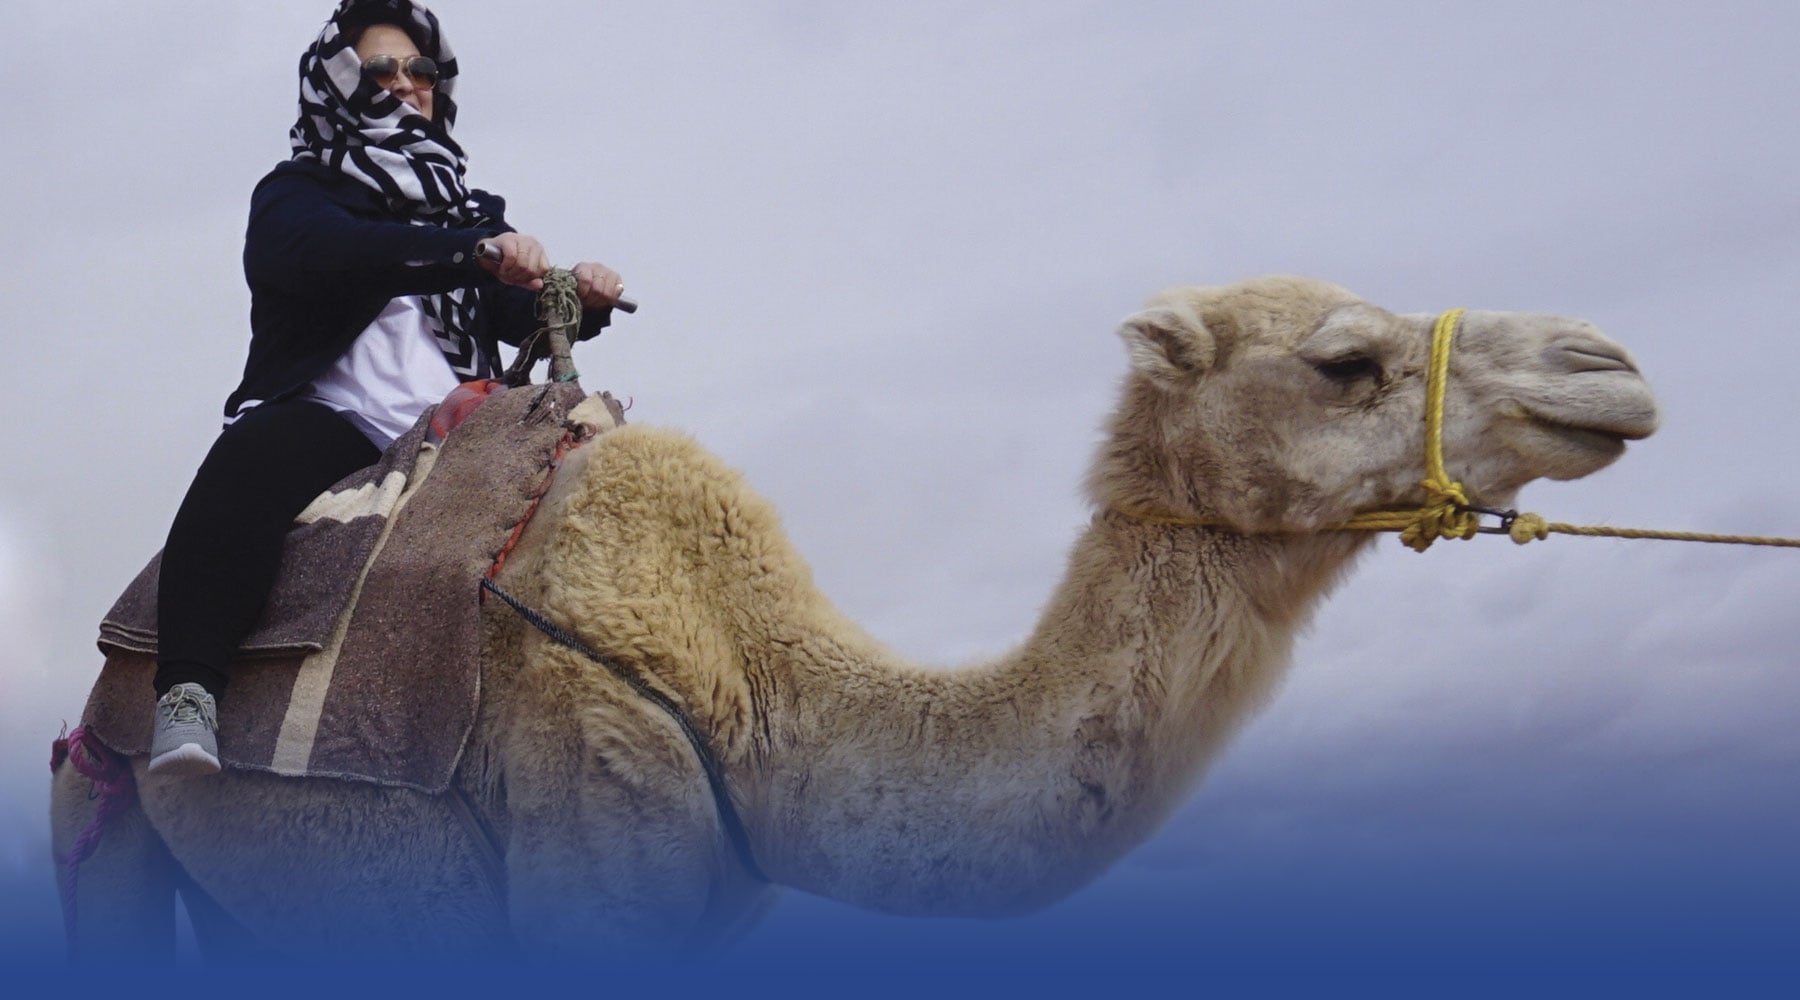 Alumna Carrie Xu enjoys a ride on a camel during a trip to Morocco in 2018.